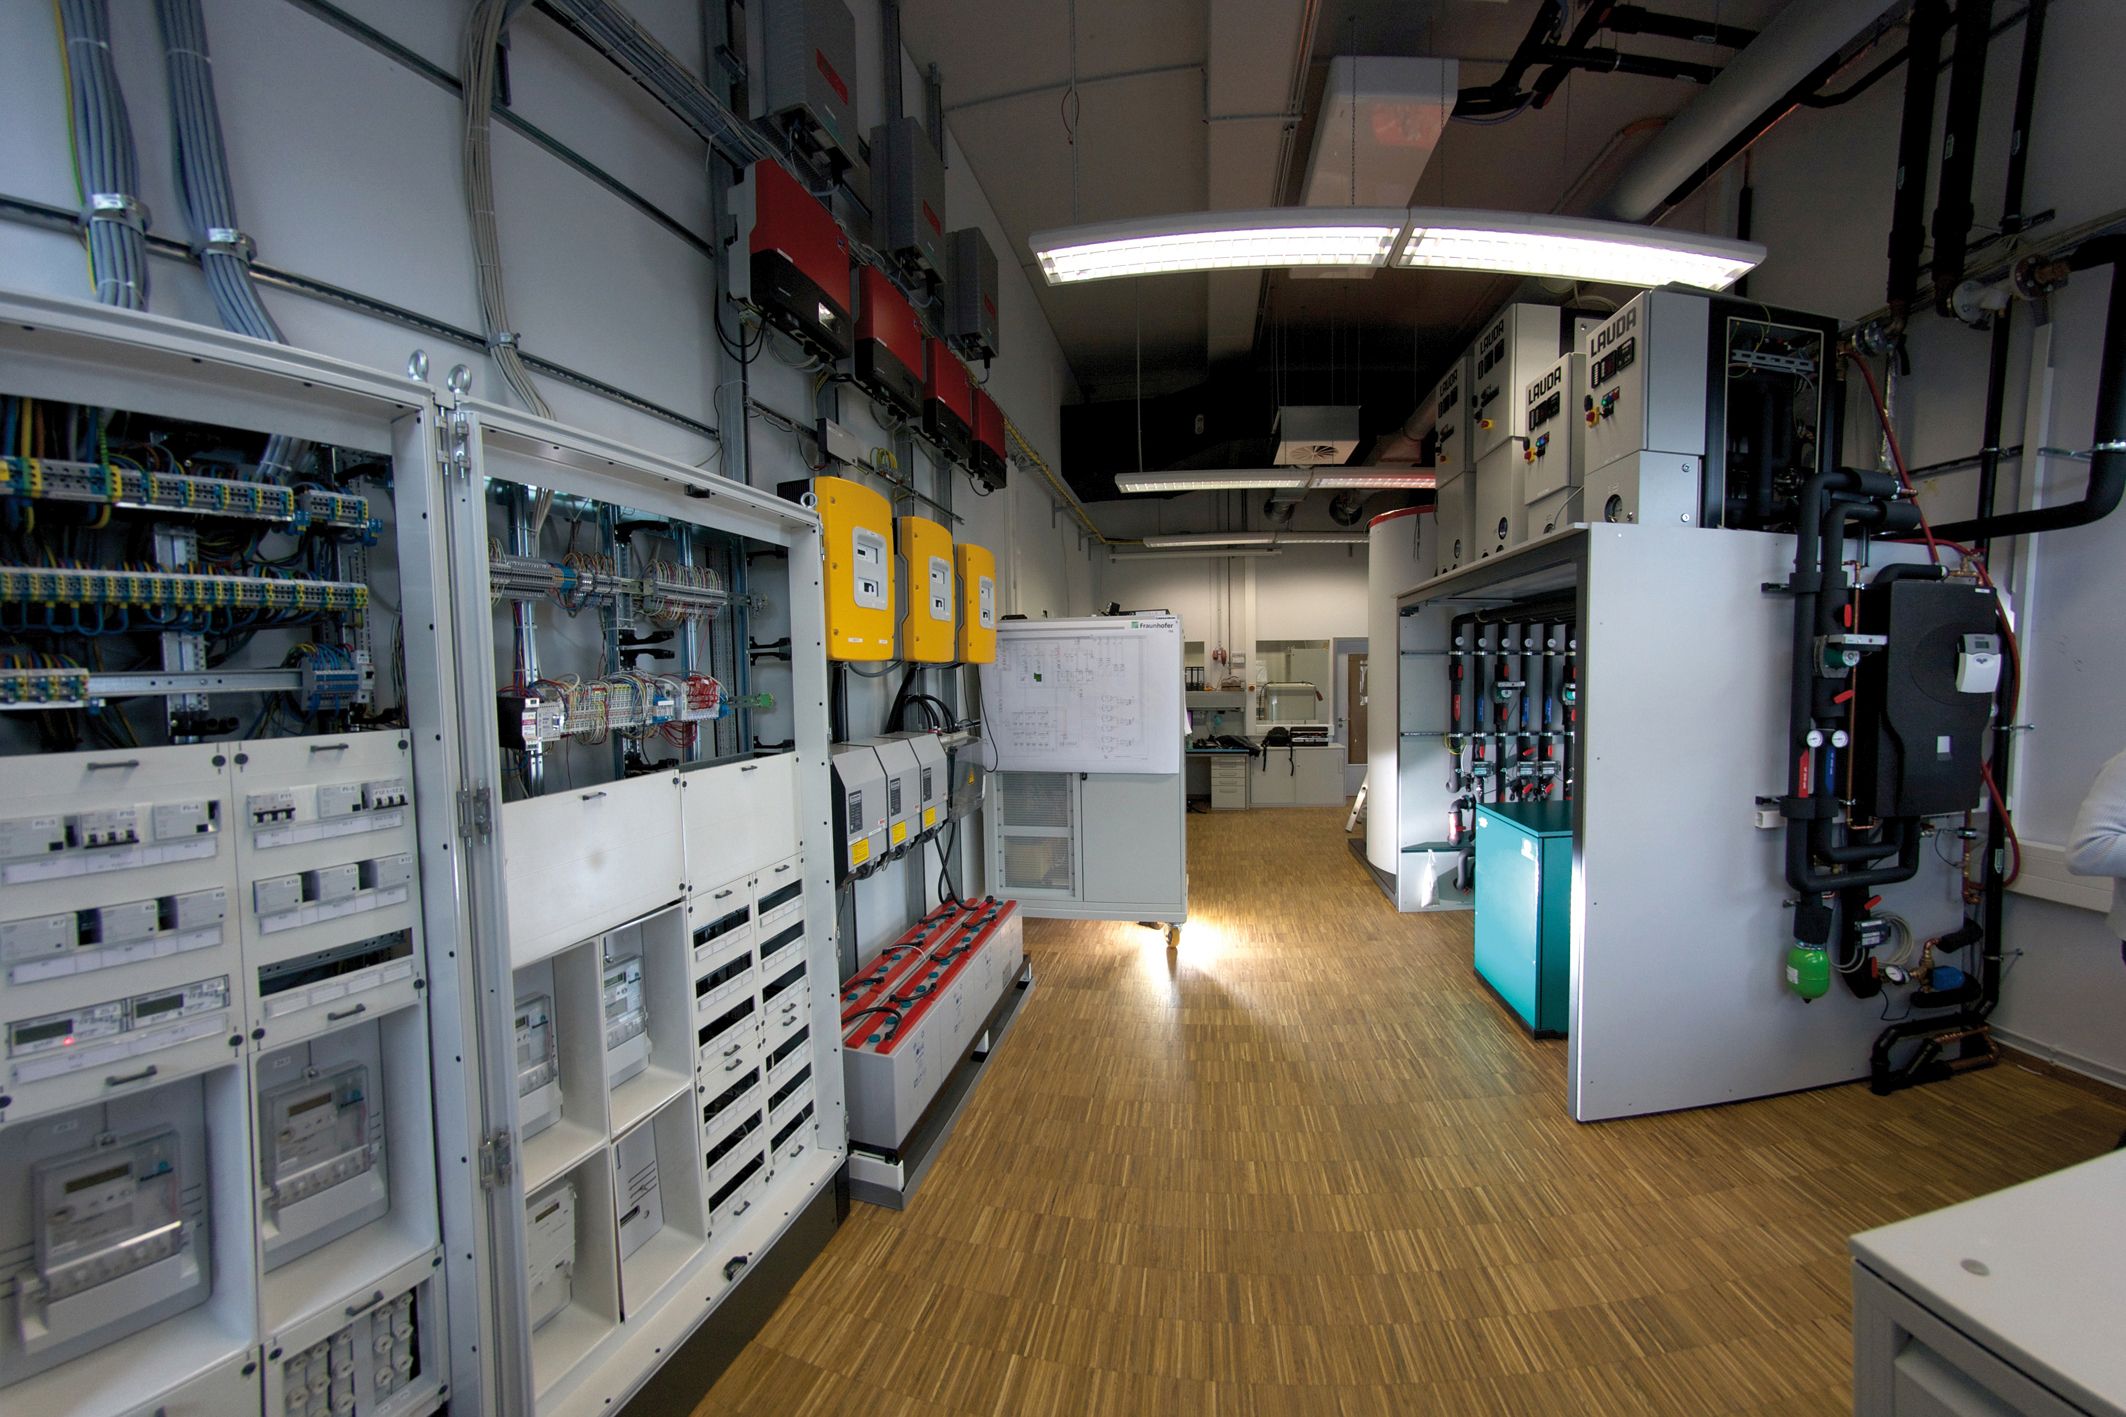 The SmartEnergyLab of Fraunhofer ISE: The digital agents are located in the three yellow cabinets.